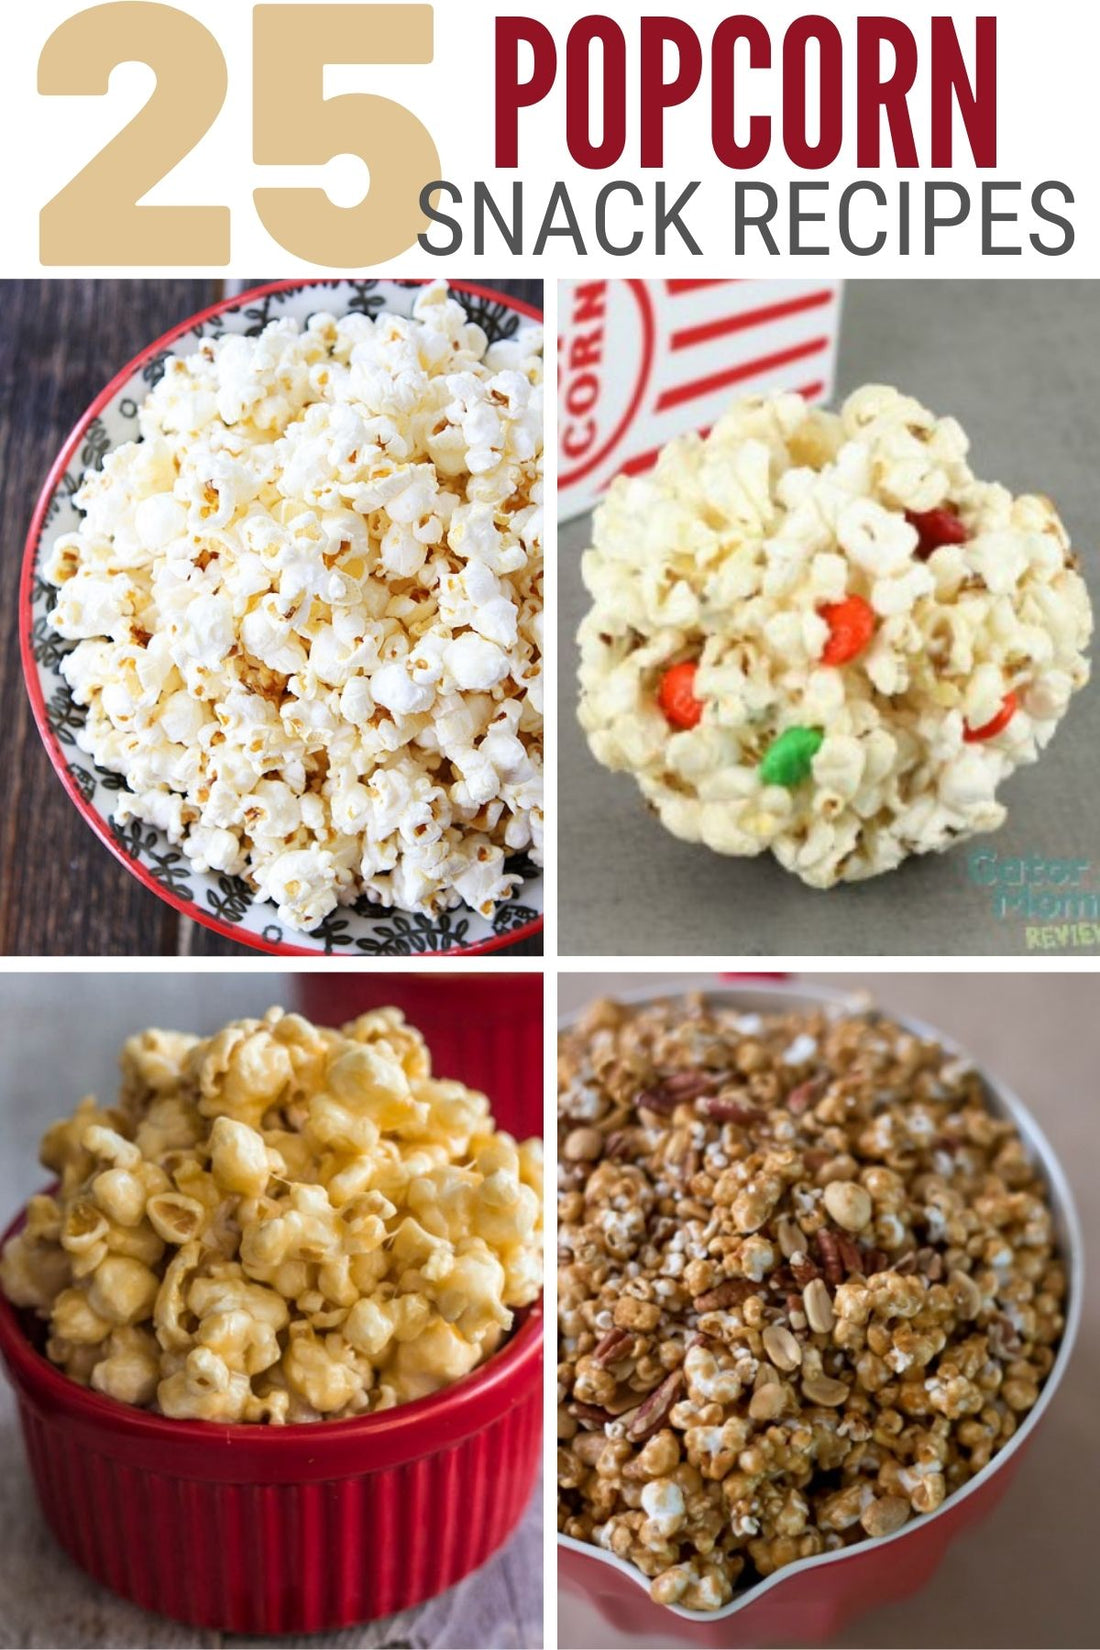 20 Easy and Simple Popcorn Snack Recipes Delicious And Fun To Make